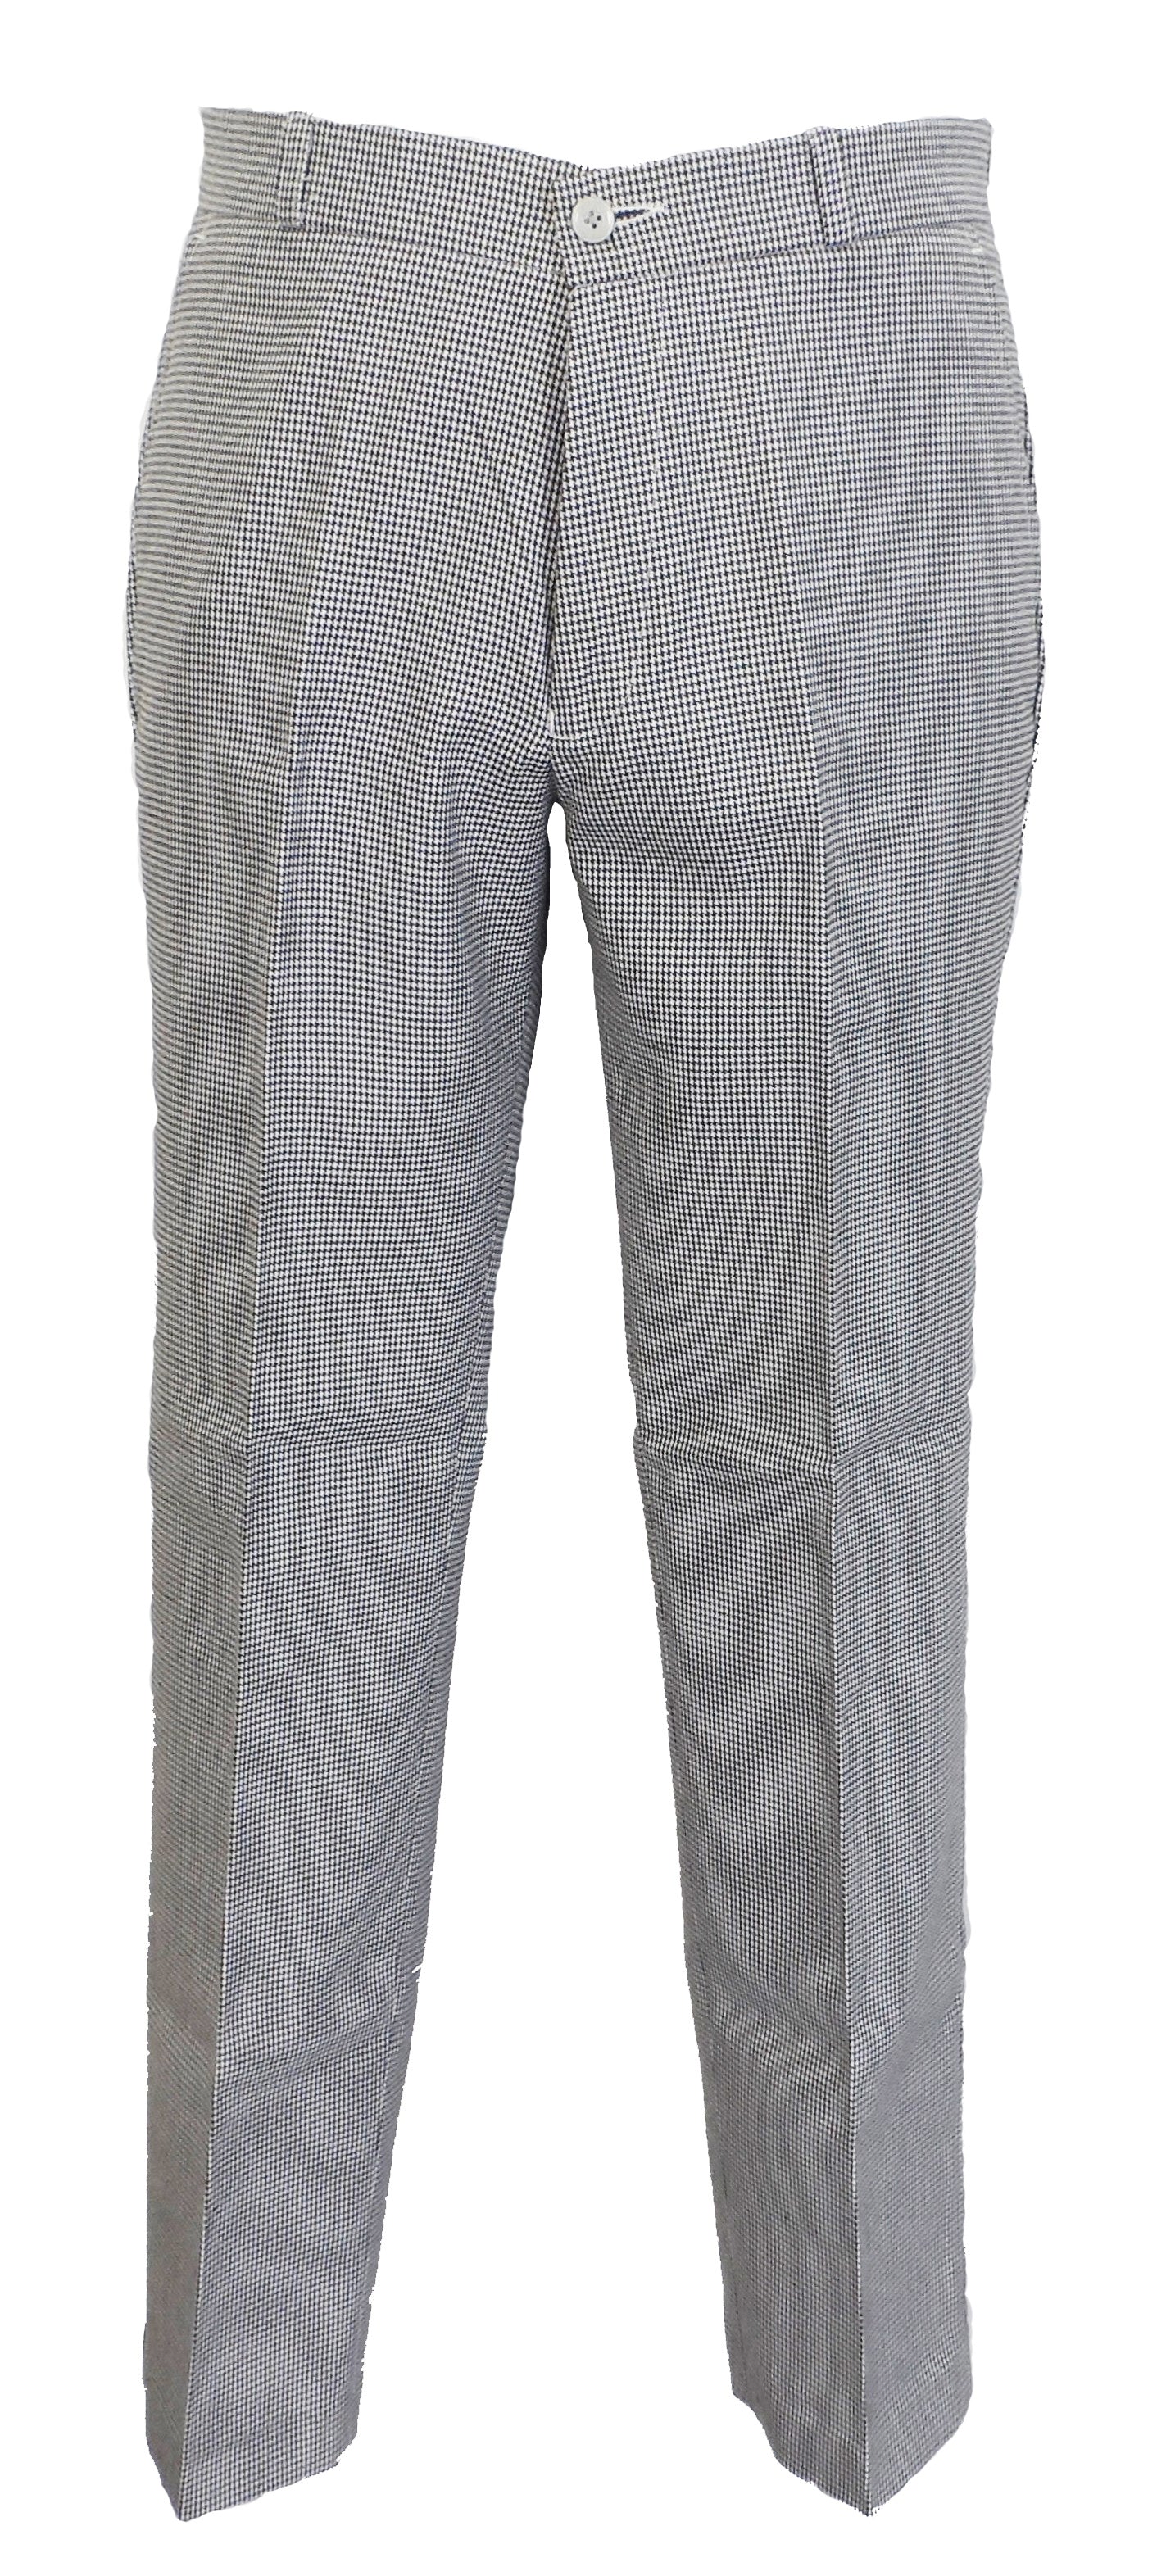 Dogtooth 60S 70S Retro Mod Vintage Sta Press Trousers